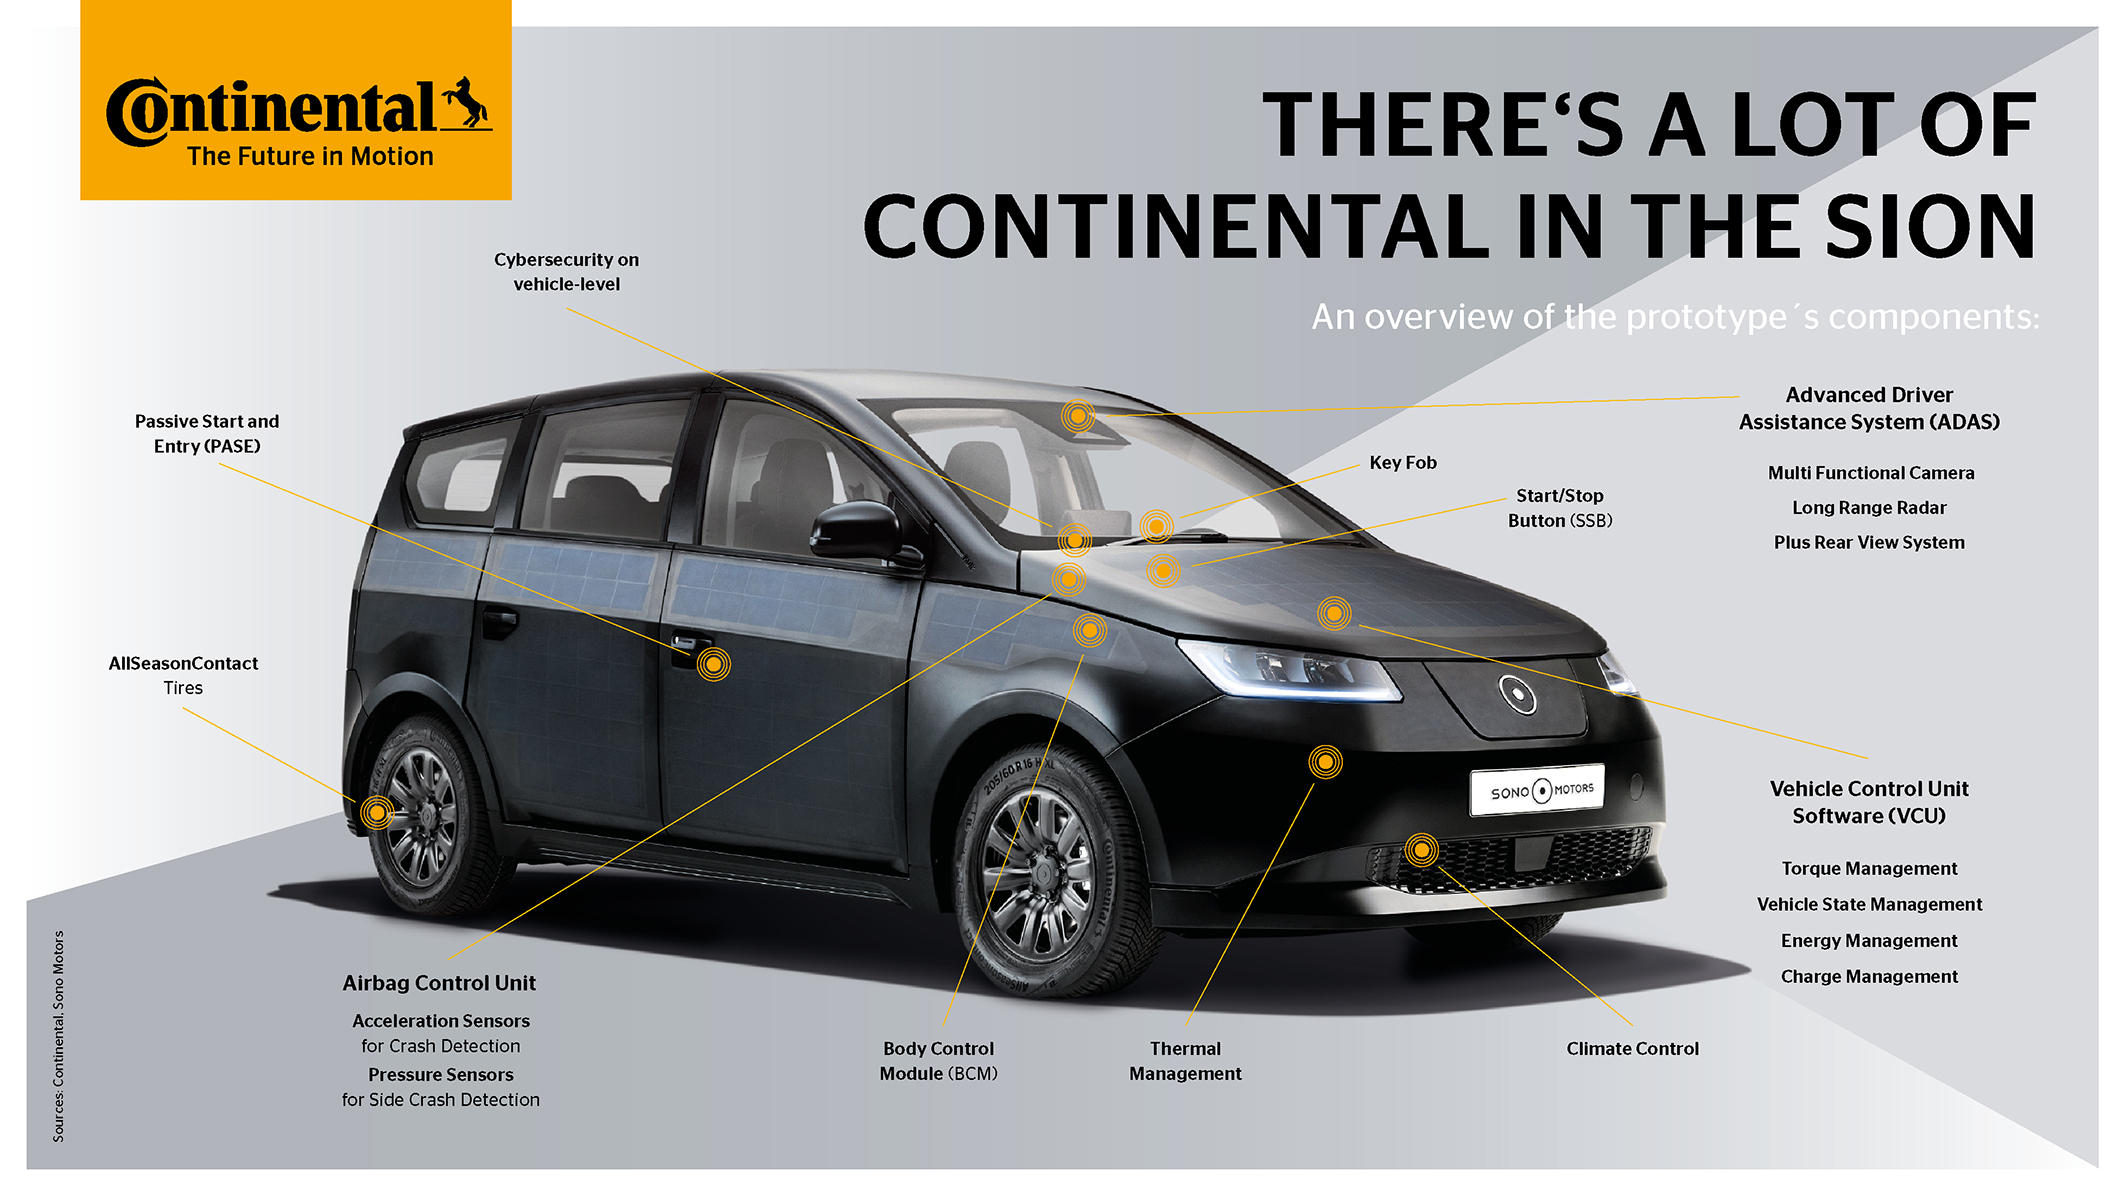 Climate-Friendly with Solar Power: Continental supports Motors in Development of Solar Electric Car - Continental AG